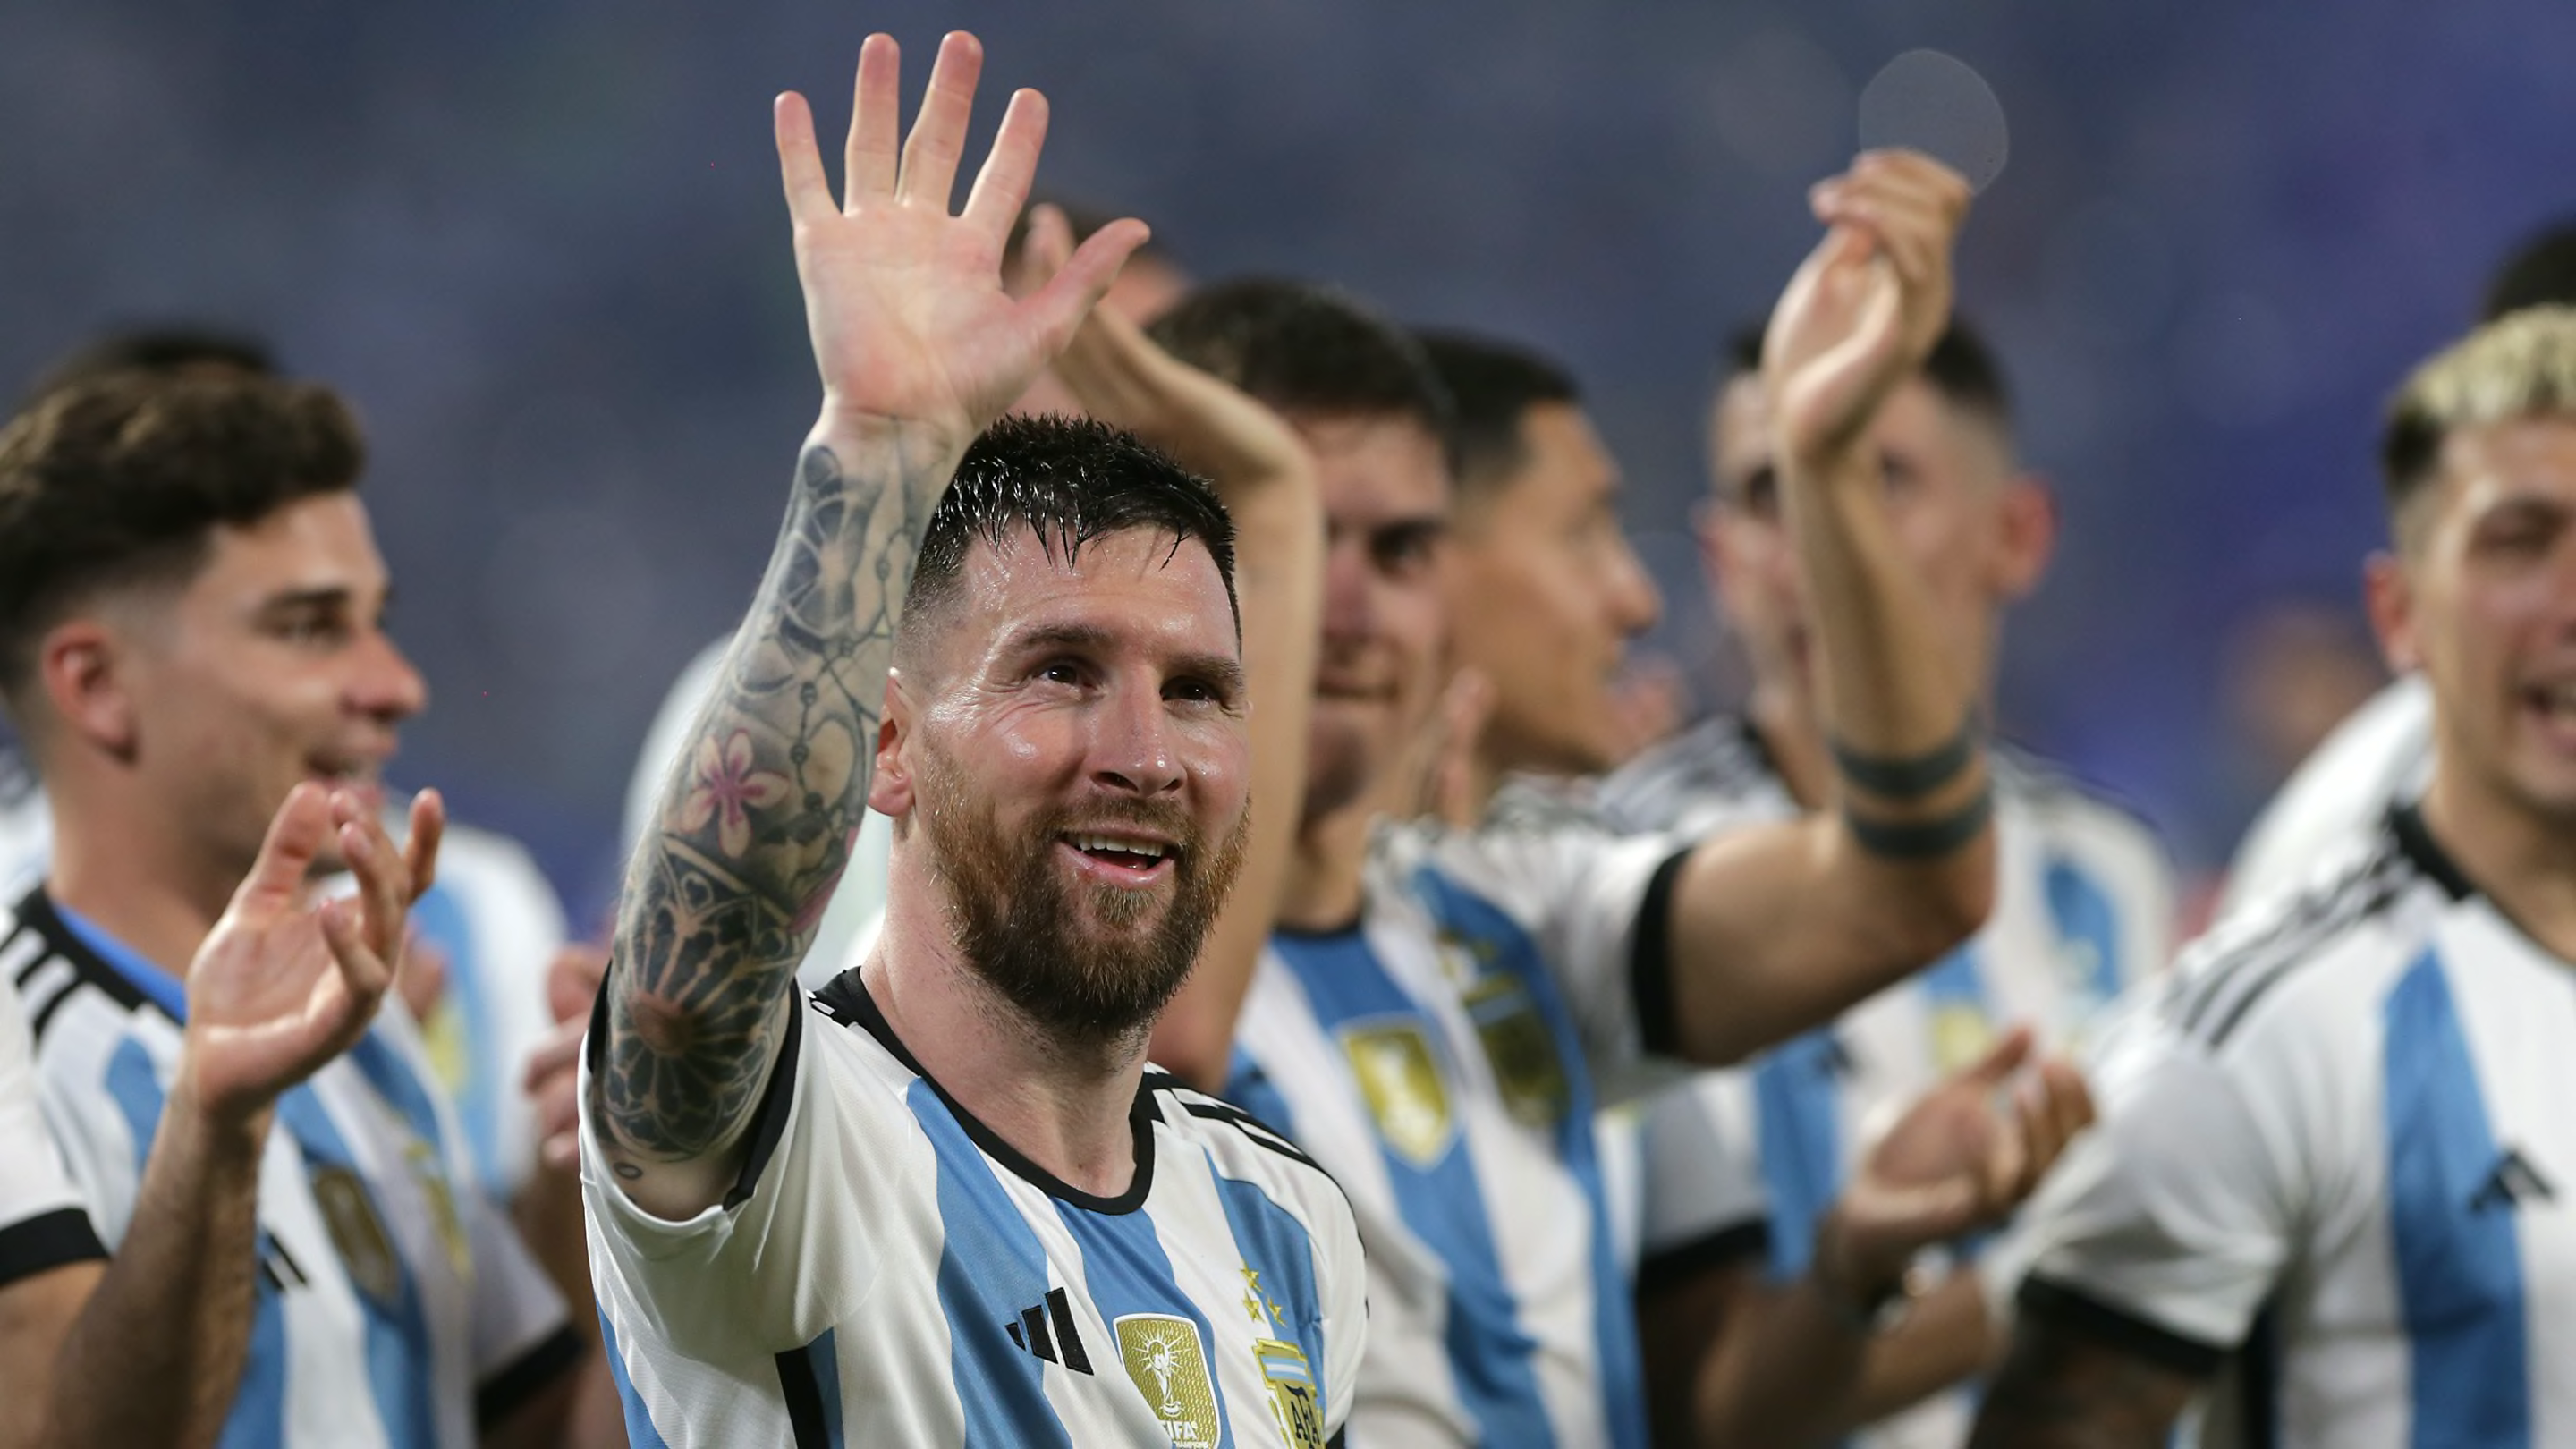 Lionel Messi surpasses 100 international goals with hat-trick against Curacao